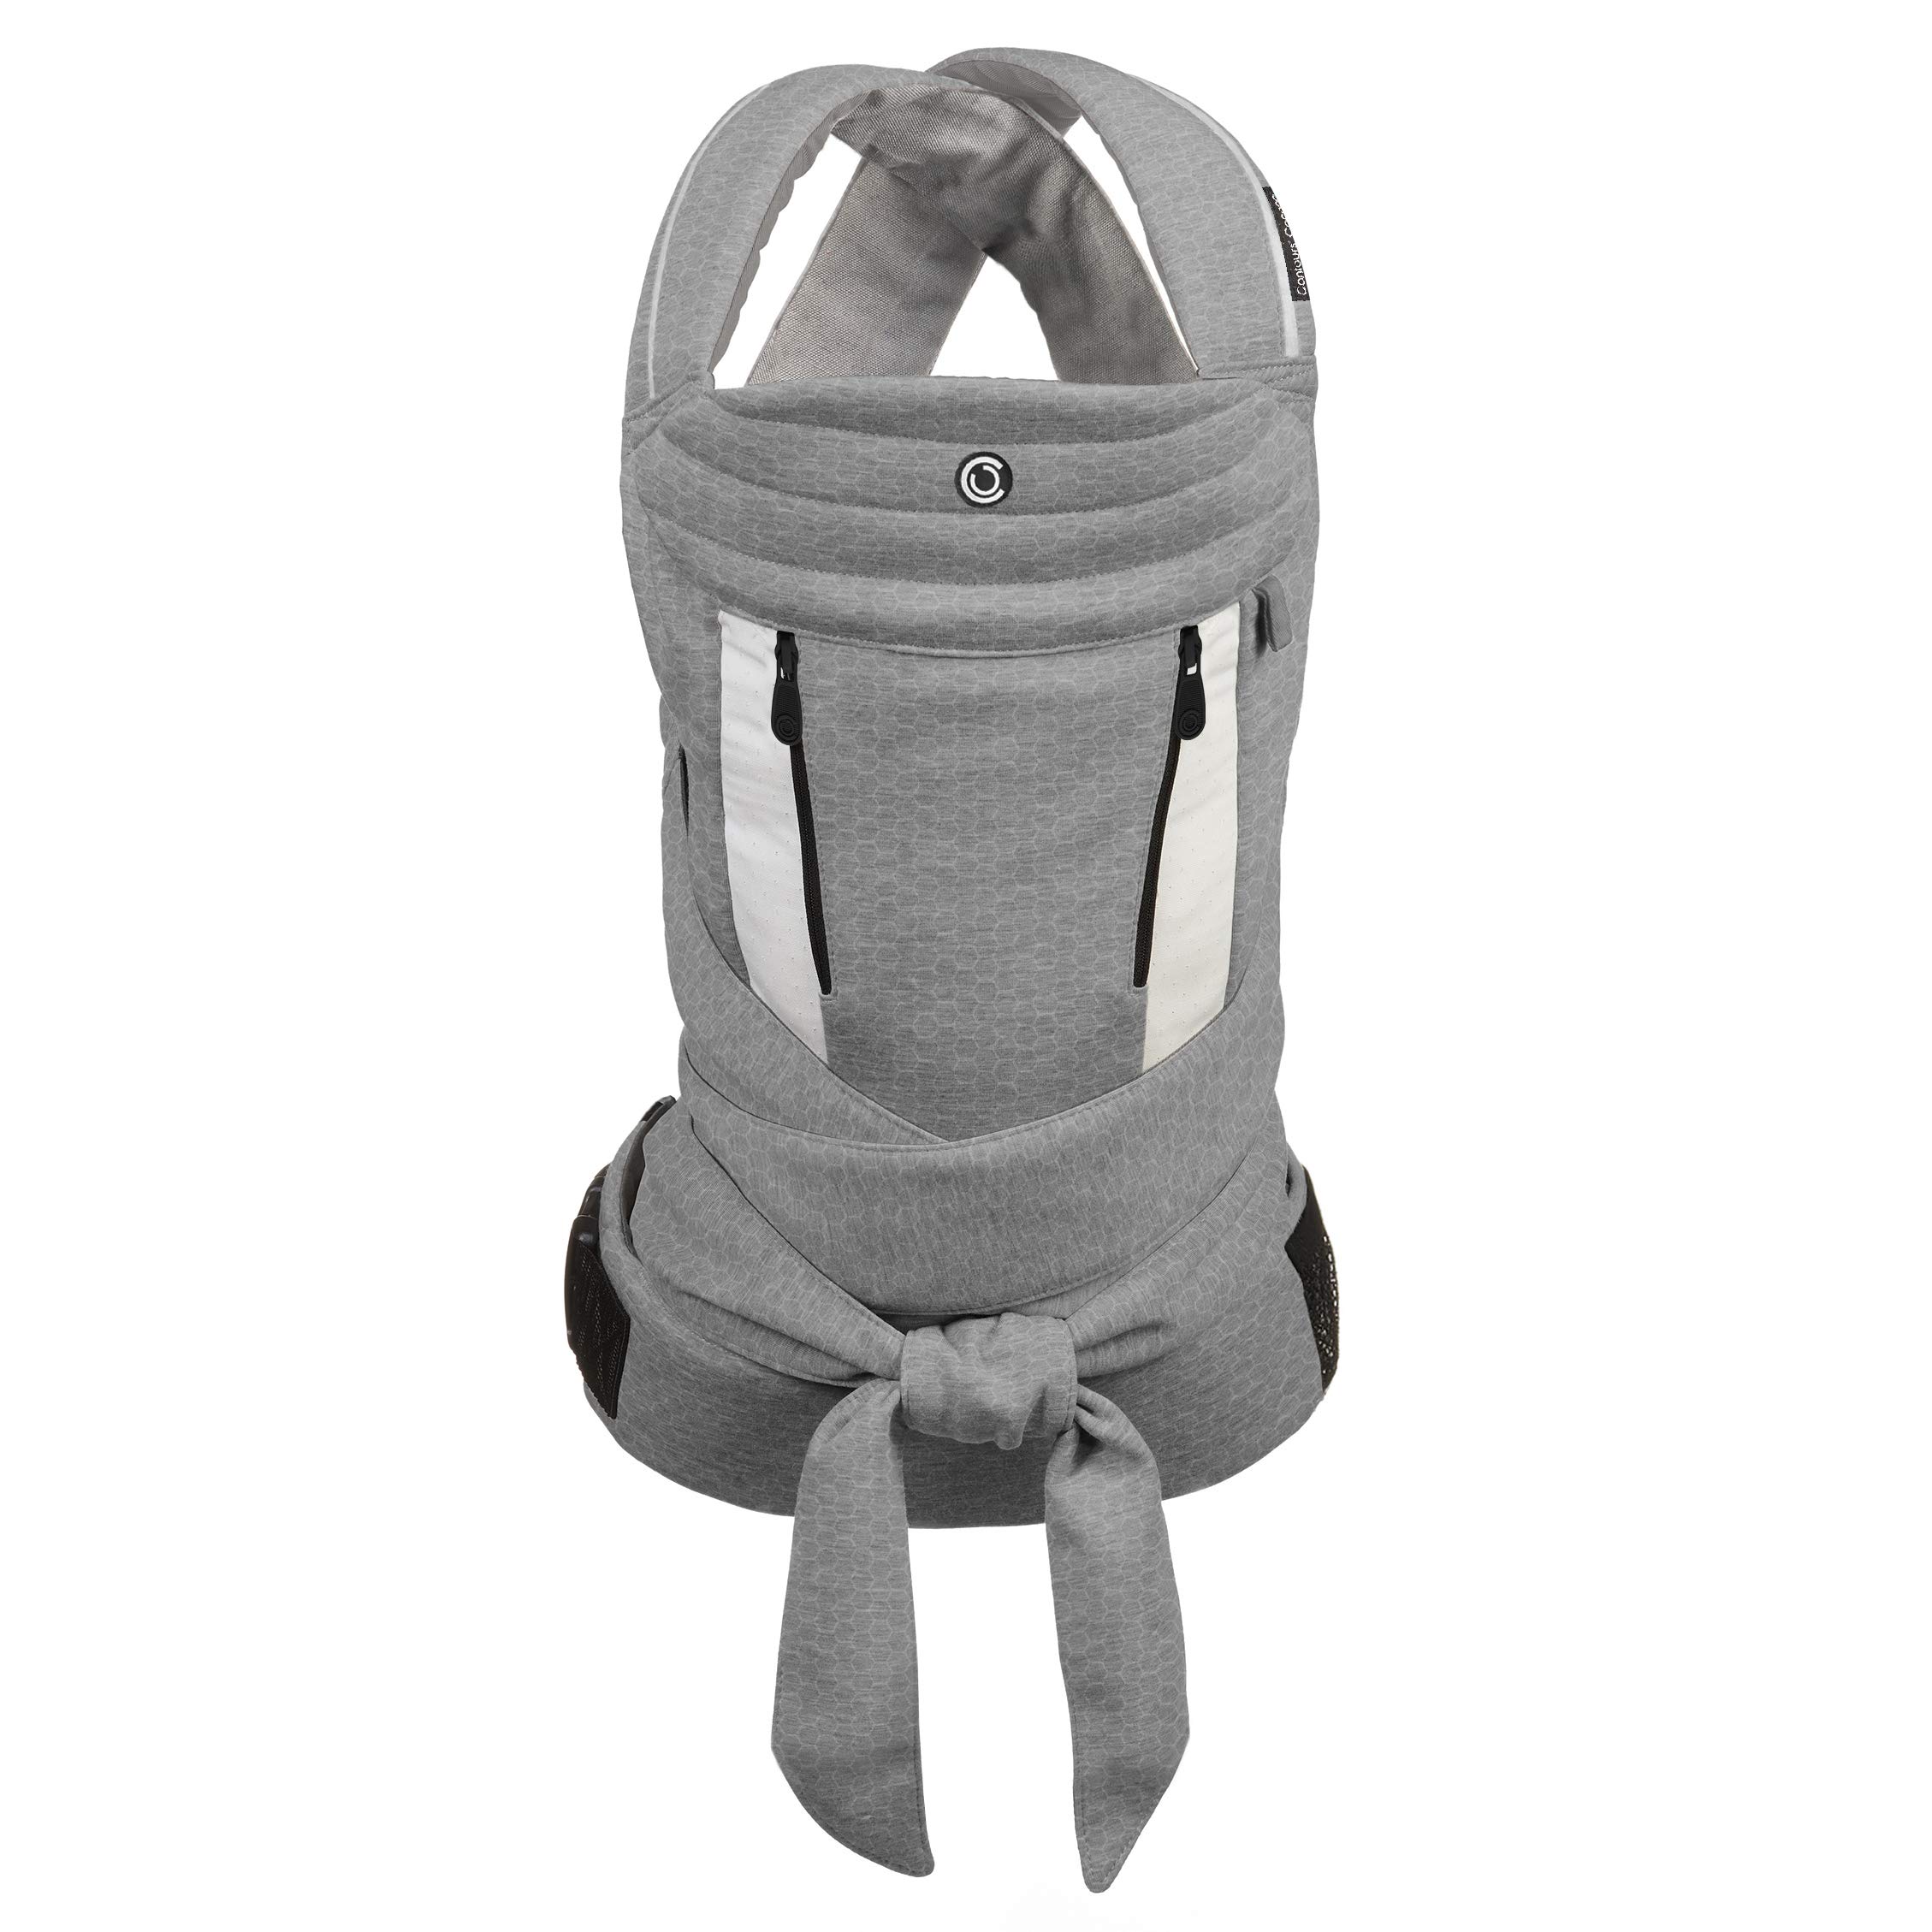 Contours Cocoon 5 Position Convertible Baby Carrier Newborn to Toddler (8-33 lbs) - Heather Gray